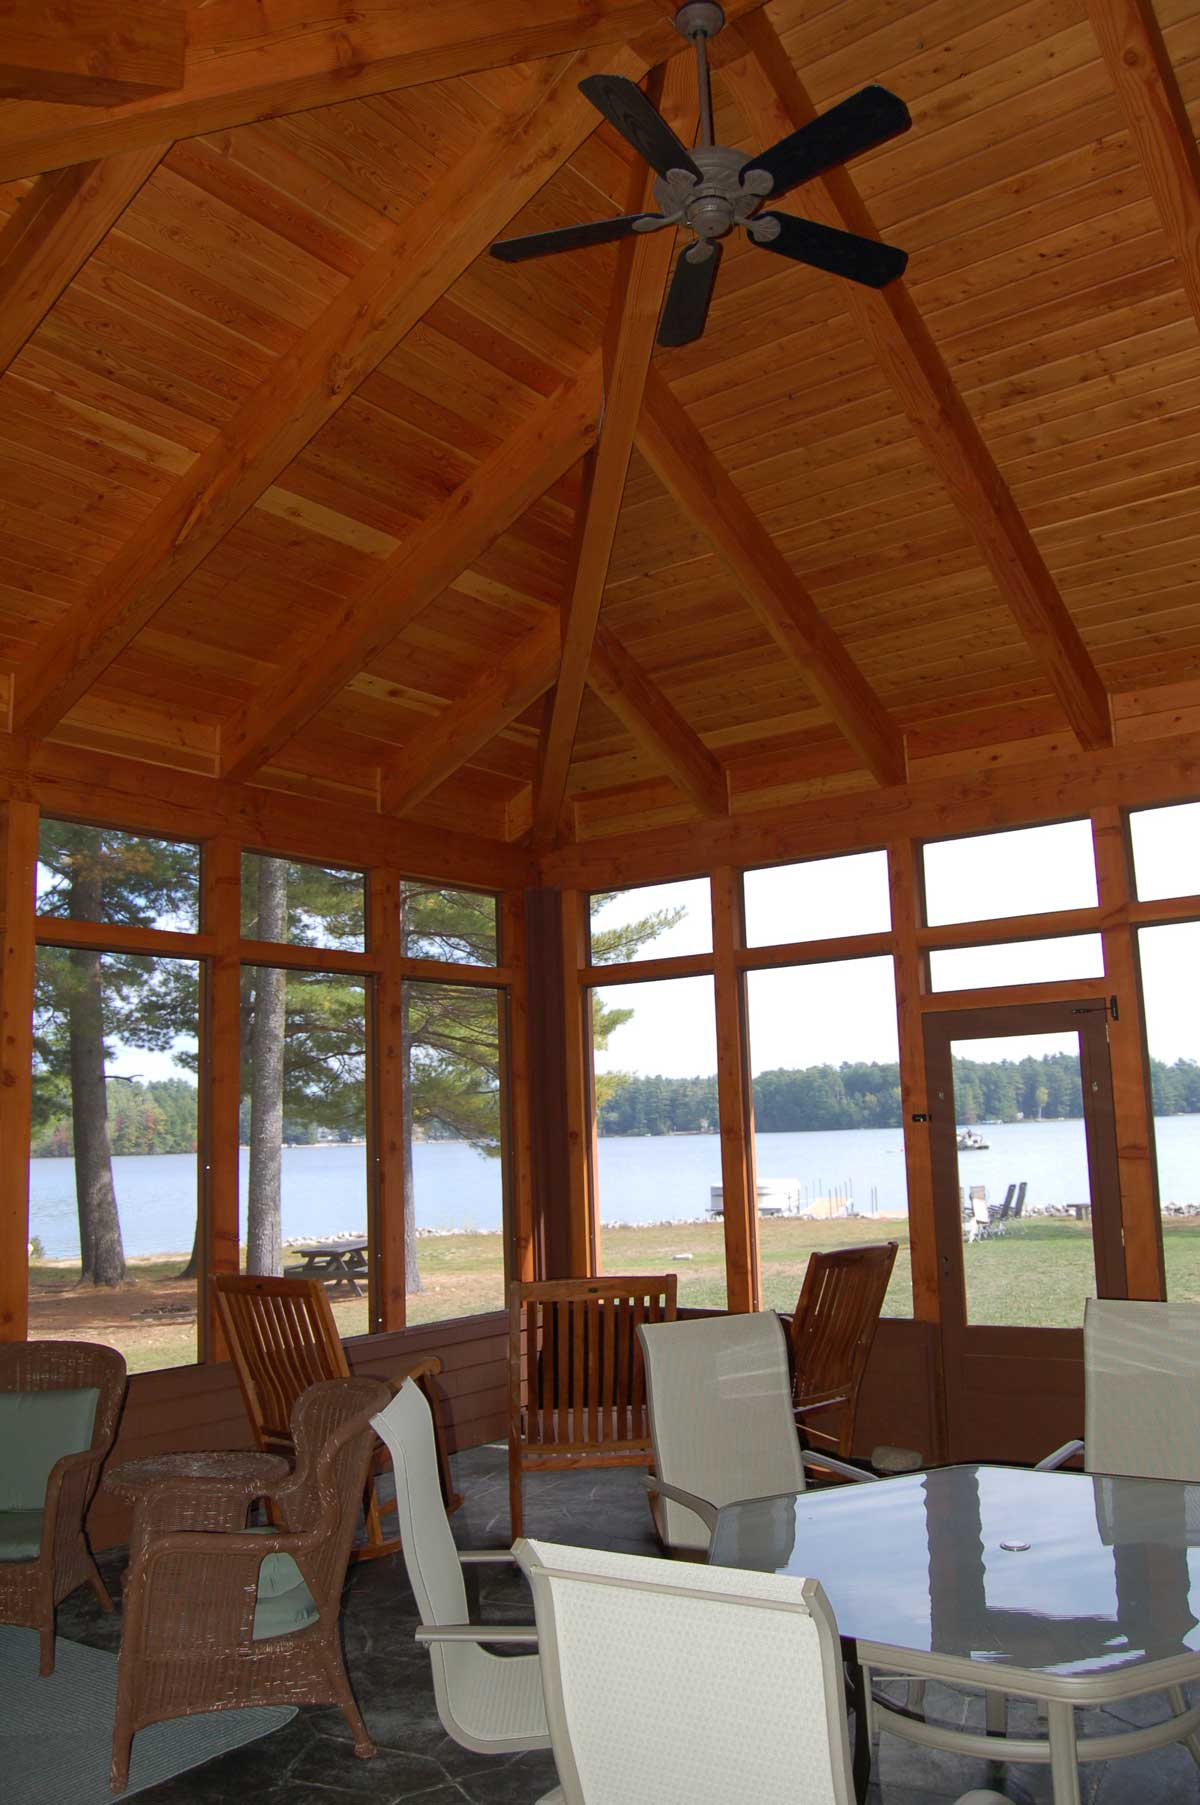 Little Sebago Lake, Maine New home build by Custom Concepts Architecture